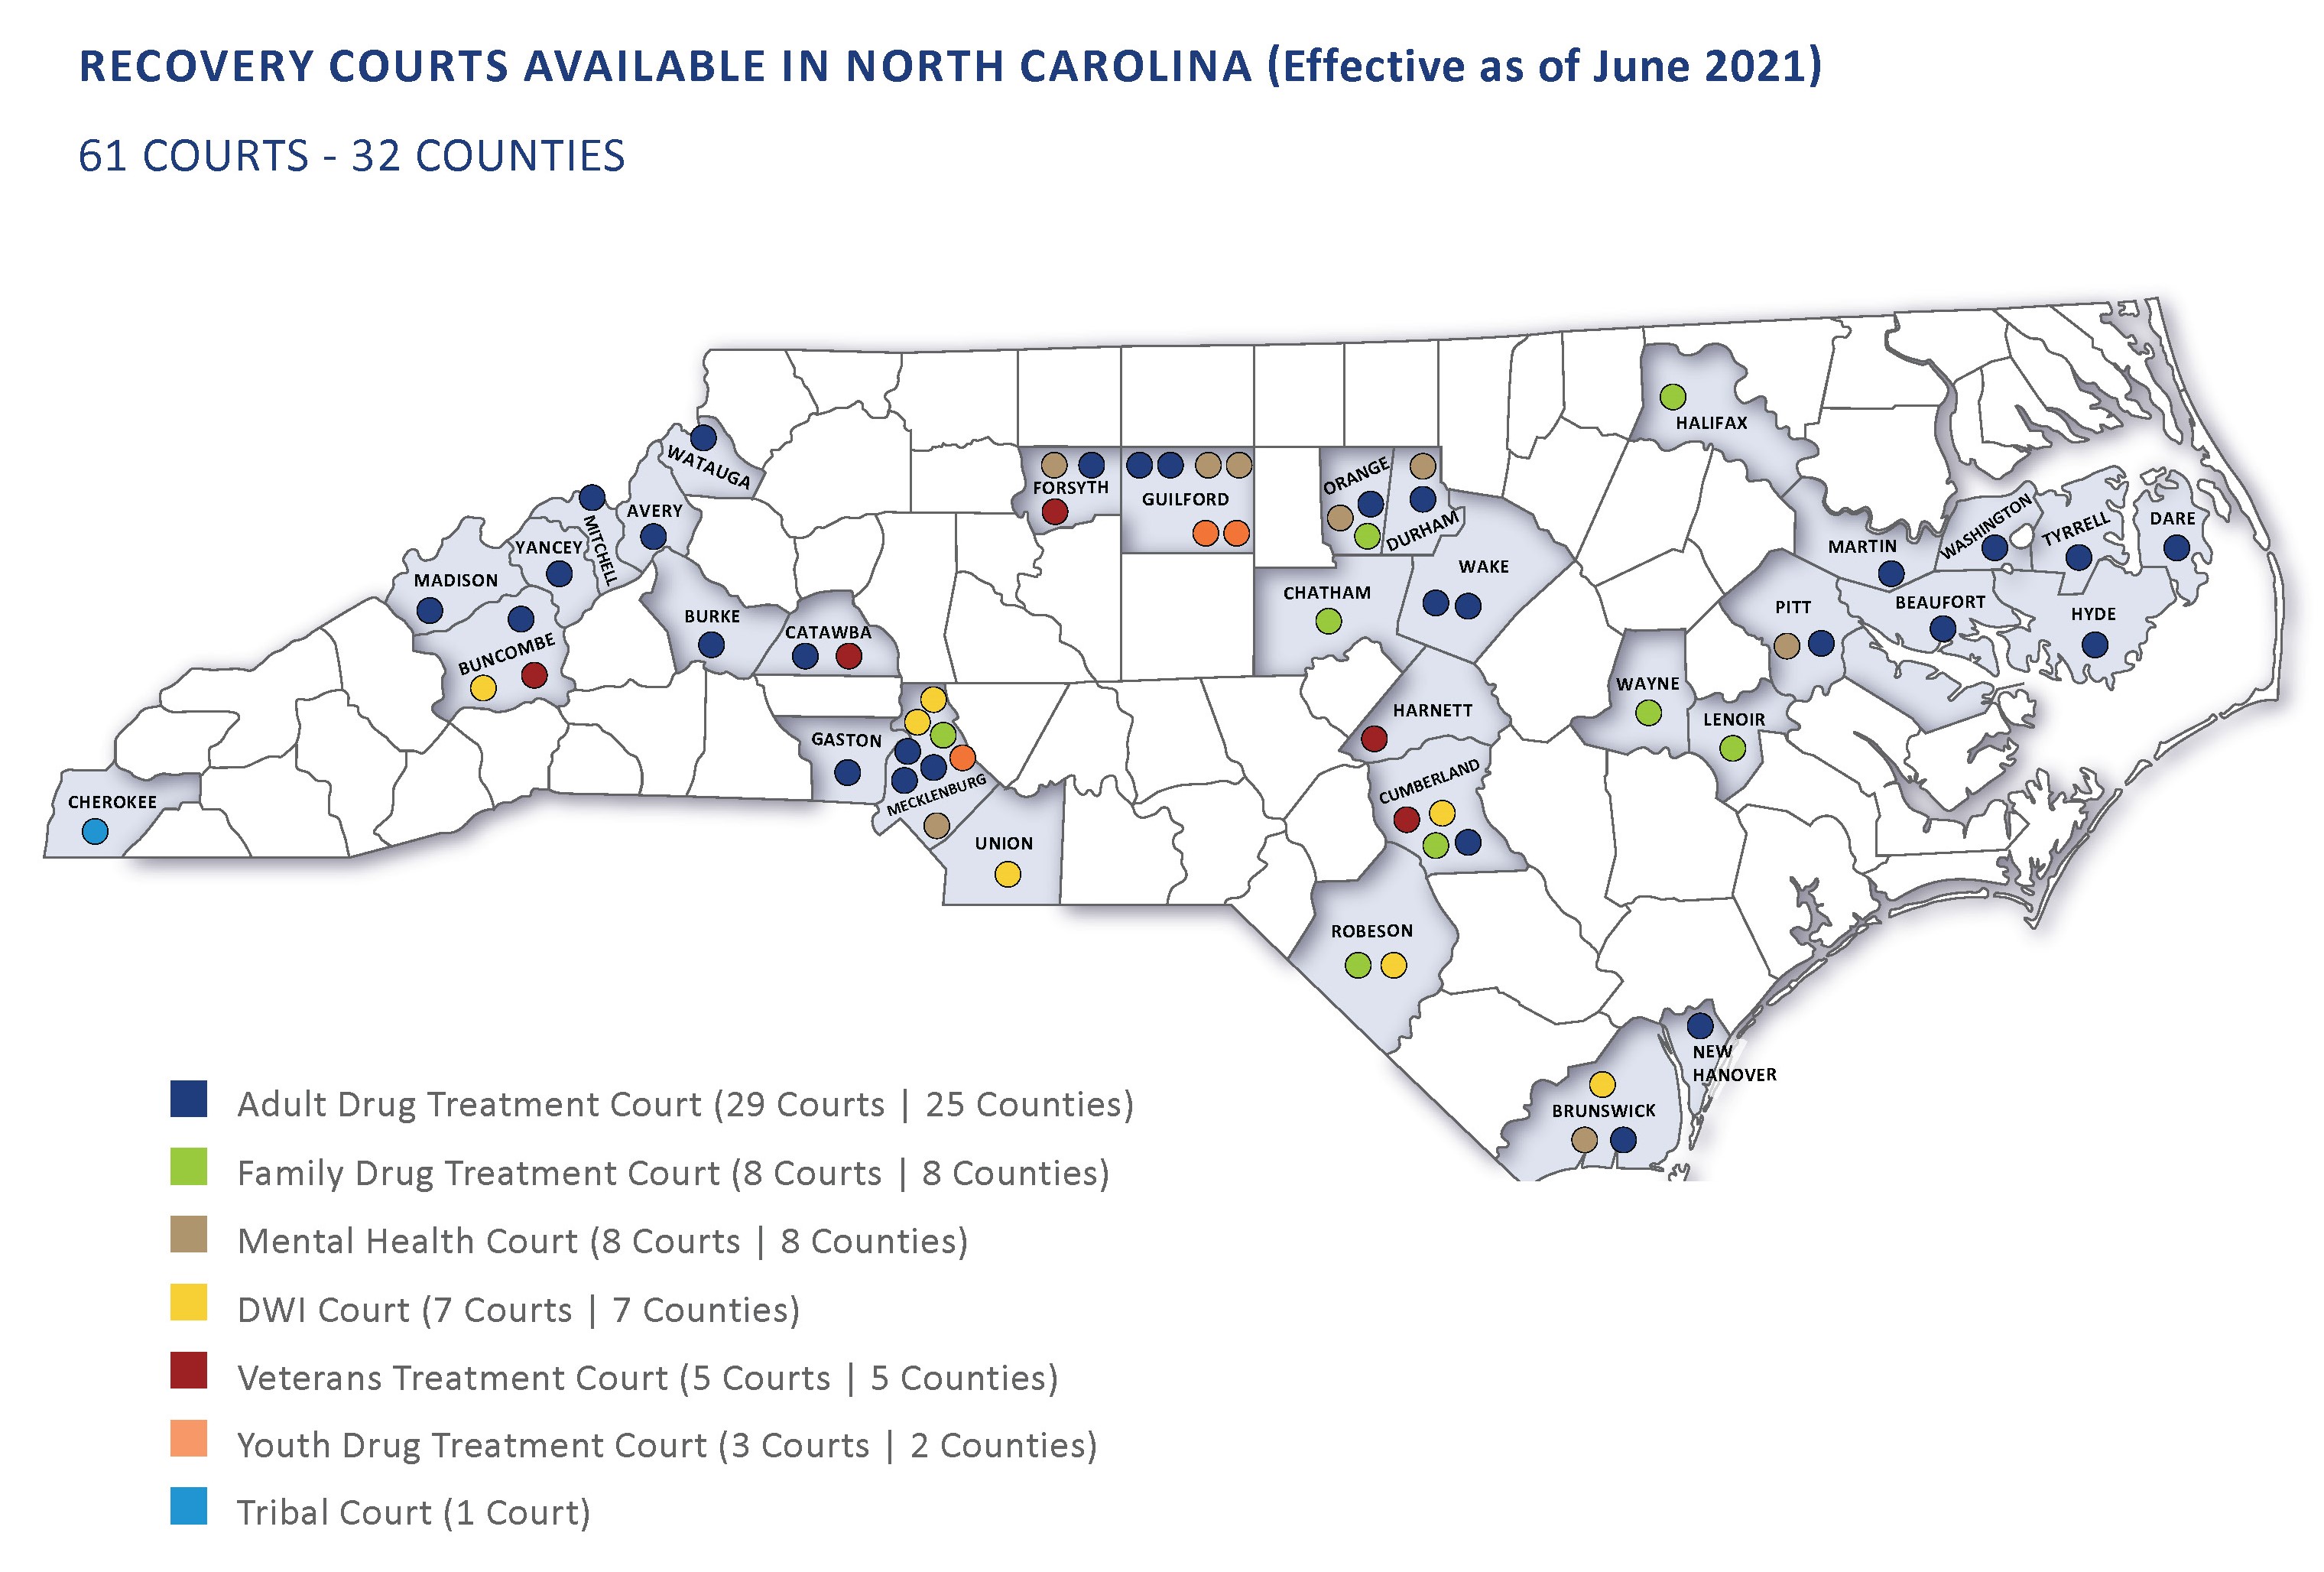 N.C. Recovery Courts Map